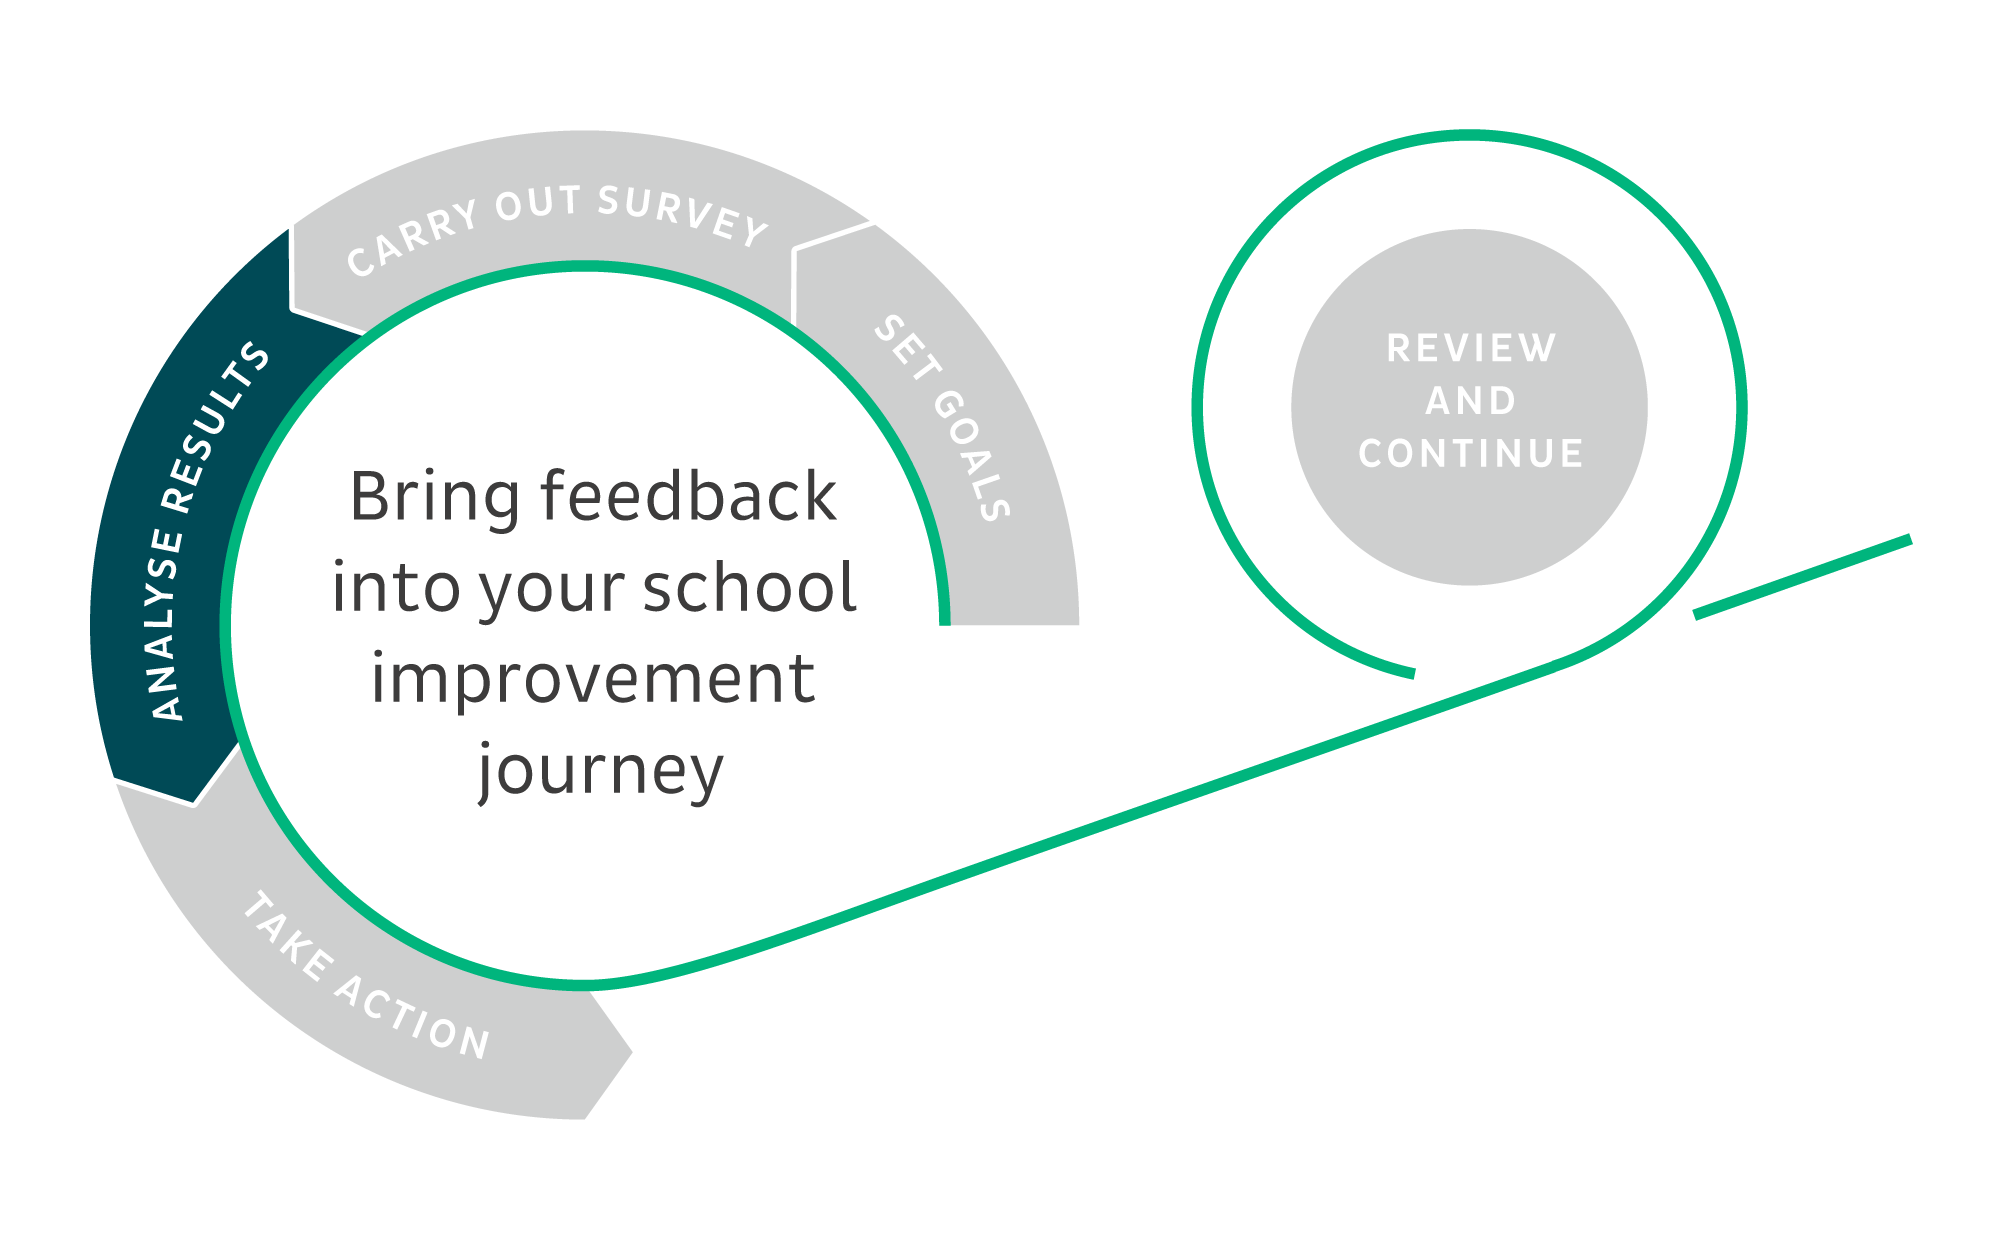 Cycle-circle visualisation_bring feedback into your school improvement journey (analyse results)